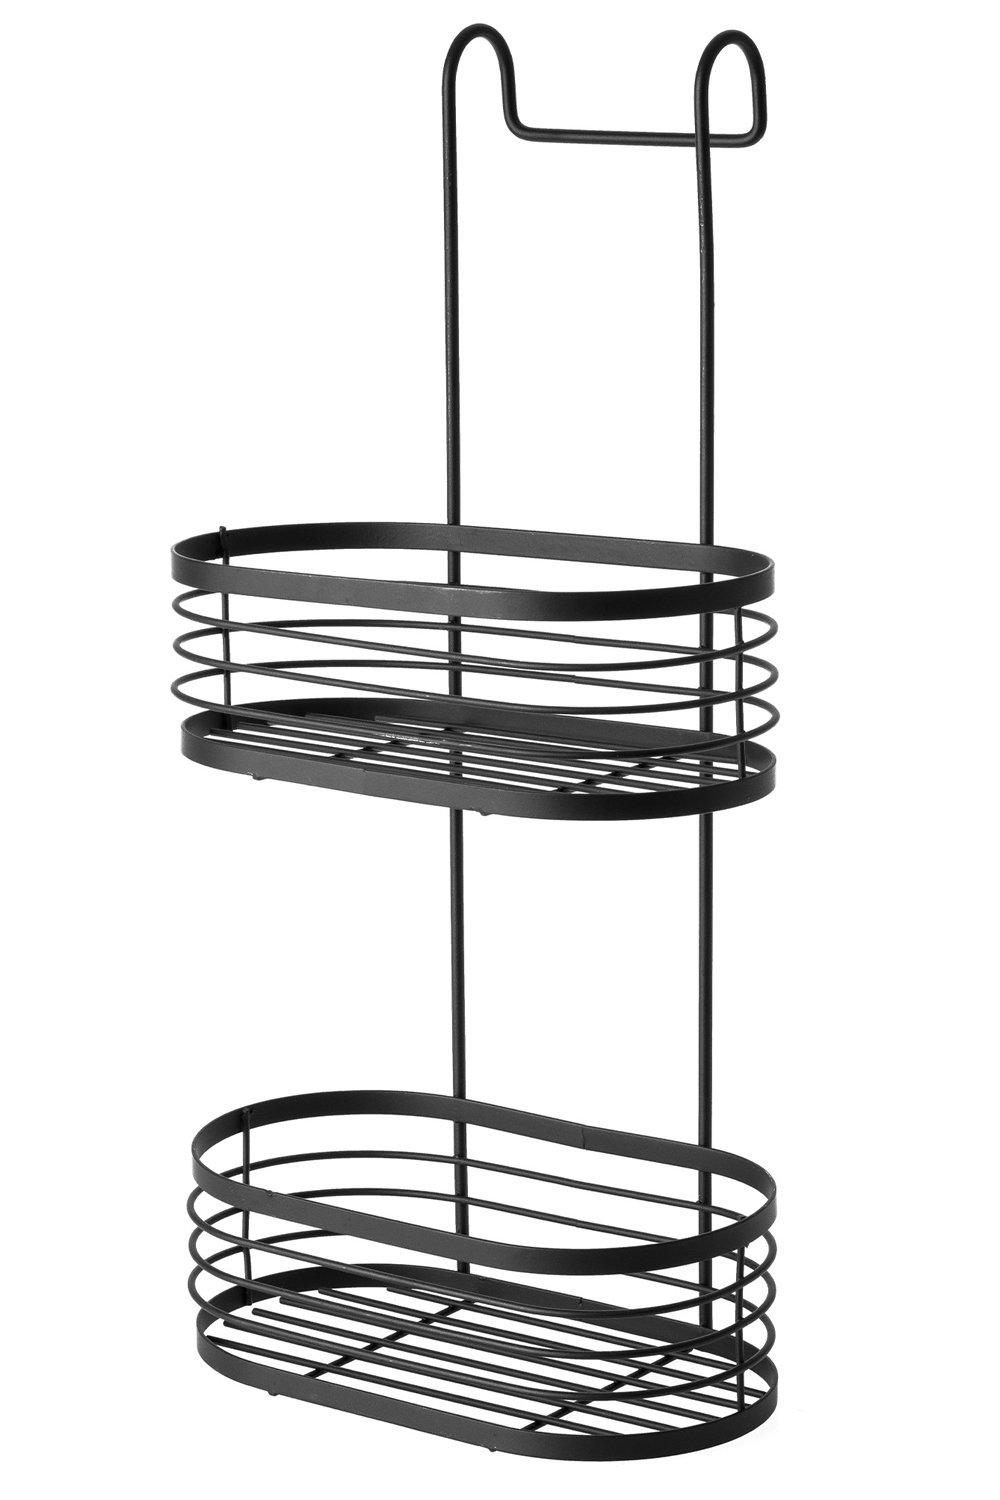 Two Tier Over Shower Screen Caddy Black